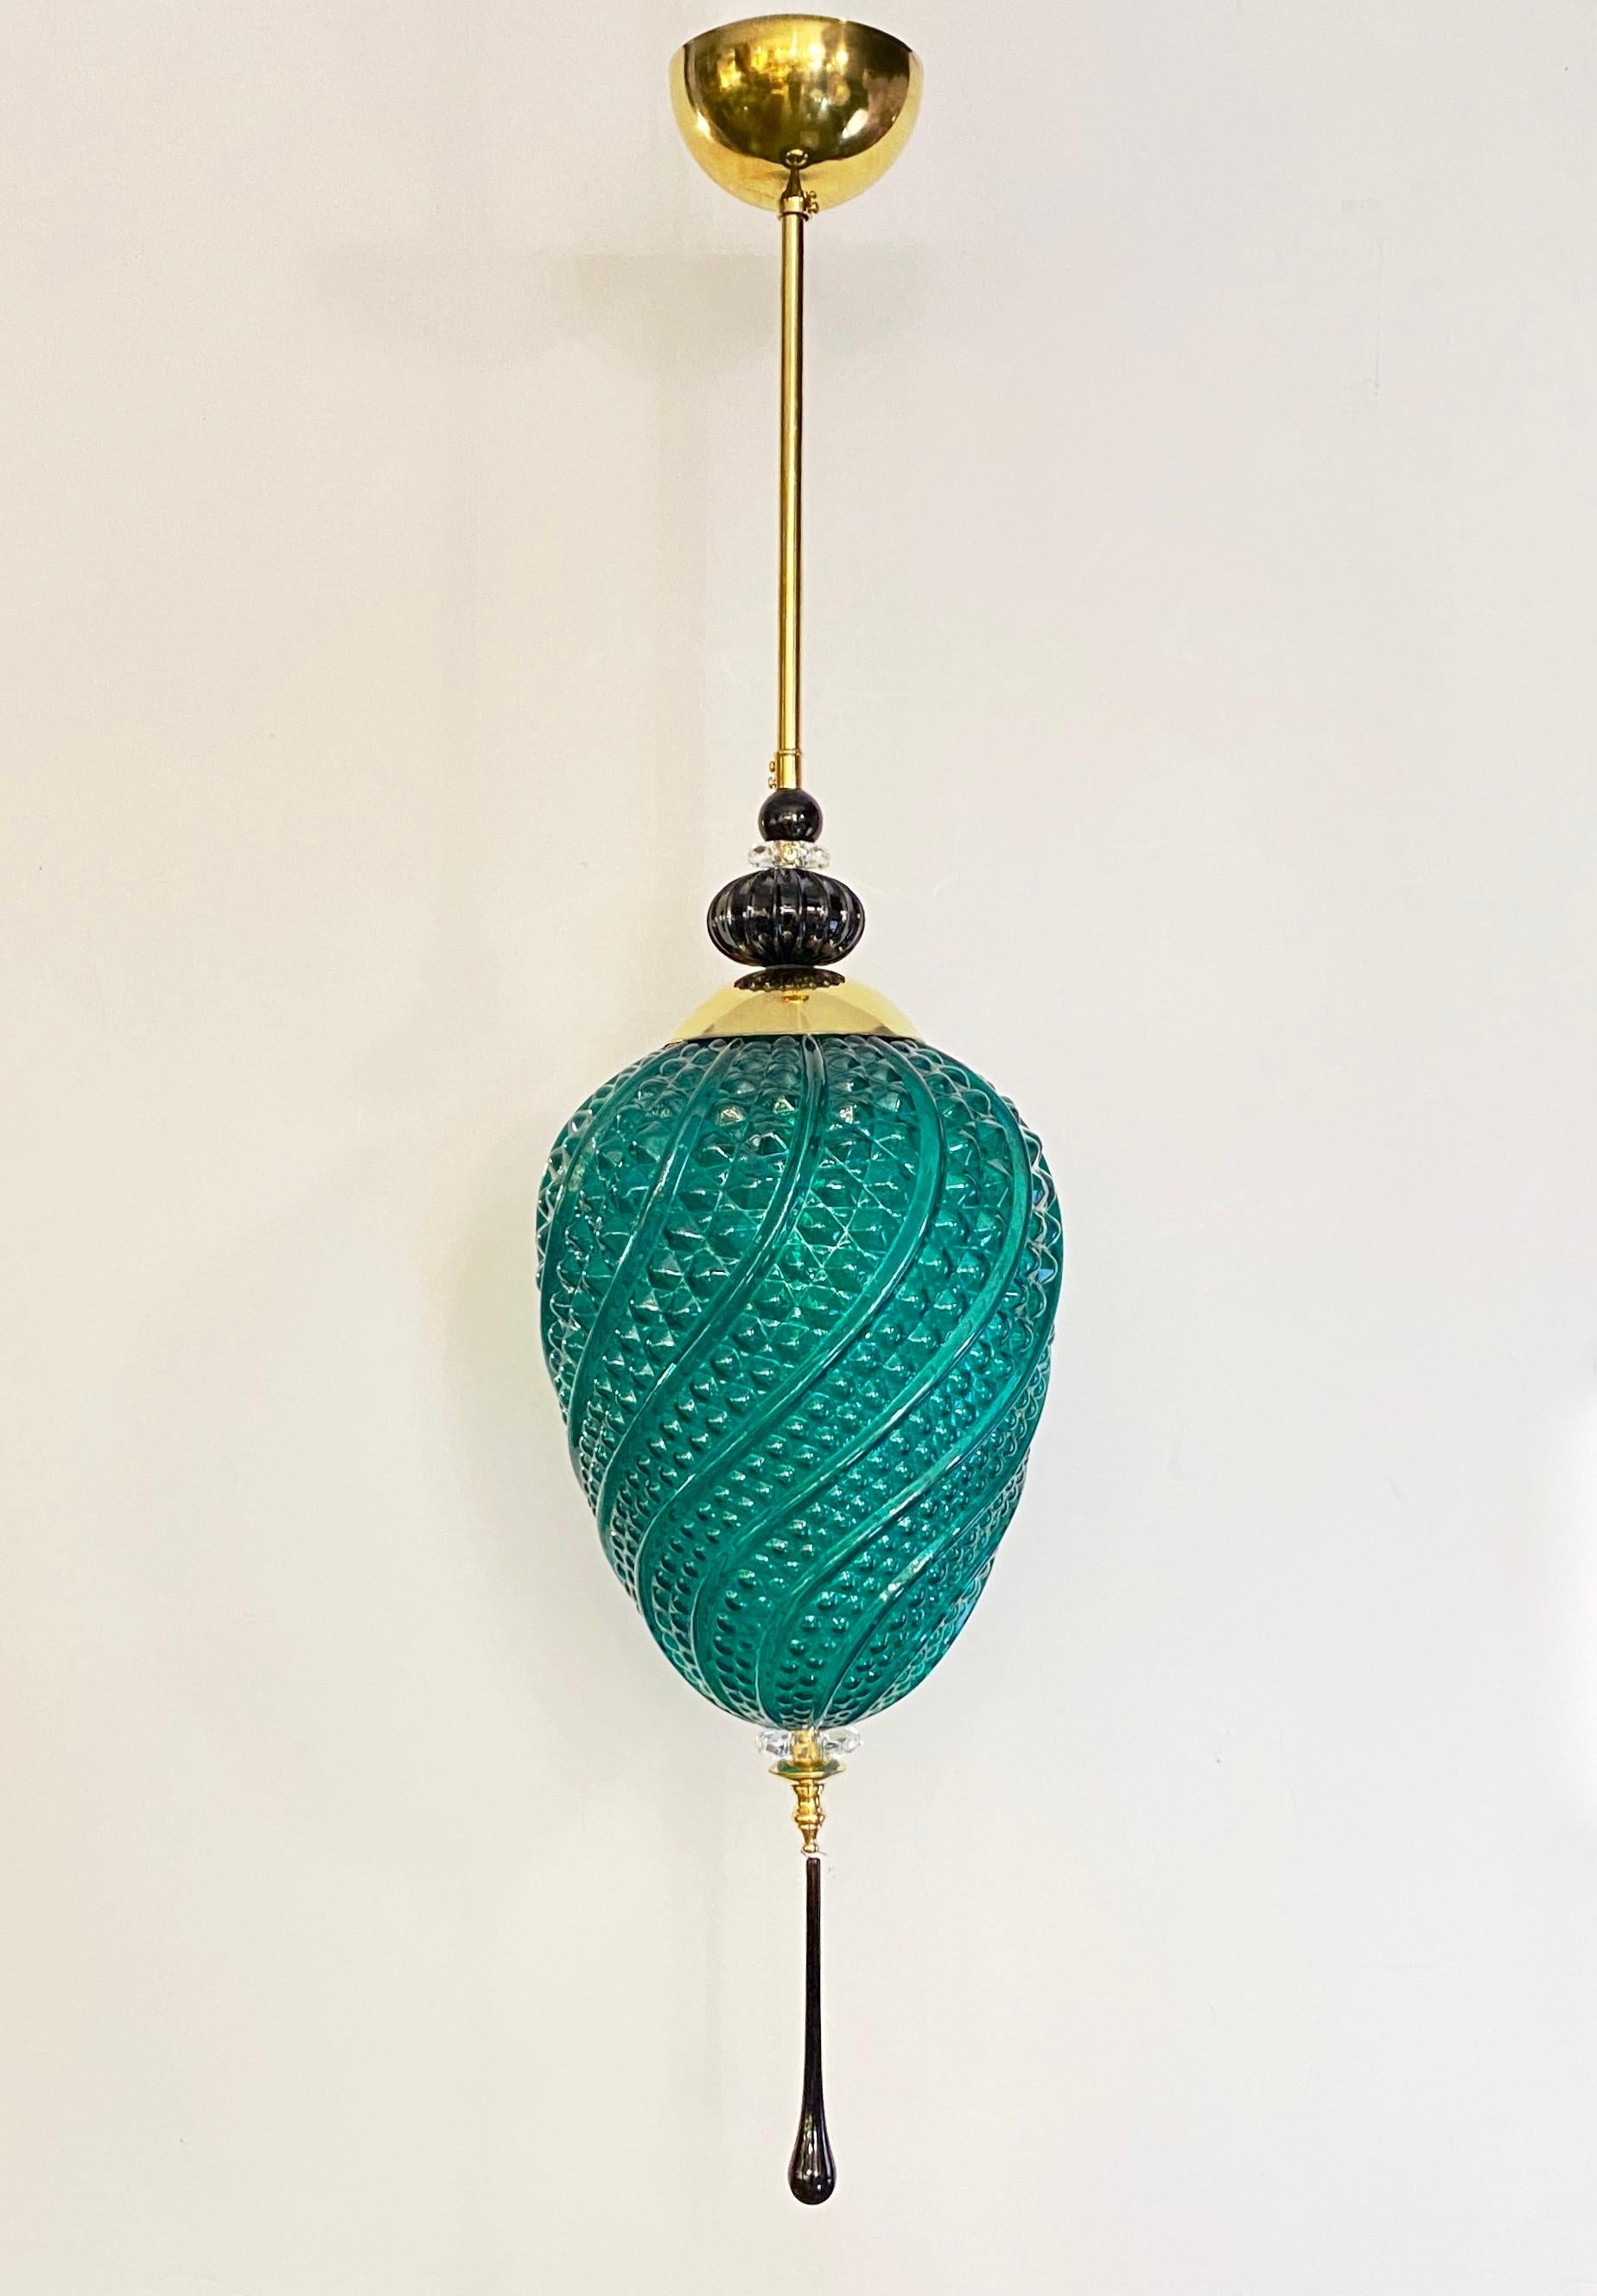 Contemporary orientalist style lantern chandelier, part of a Venetian geometric modern series with 4 shapes as per image, entirely custom made in Italy, here with brass hardware, the organic emerald green egg shape globe in an innovative blown